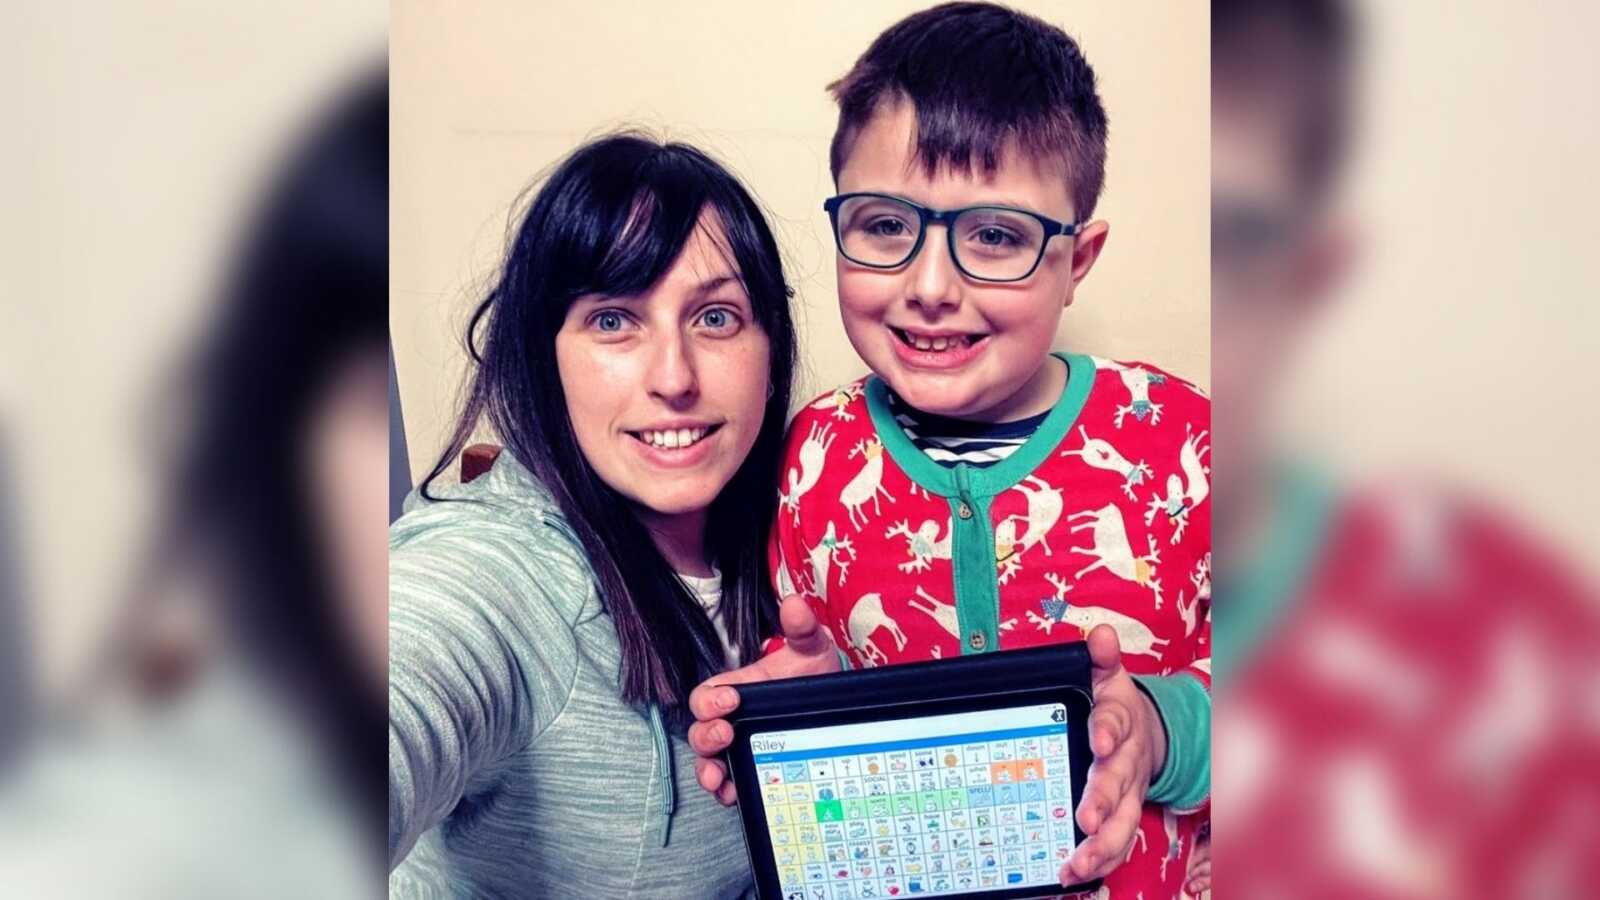 A mom and her son with autism holding a communication device